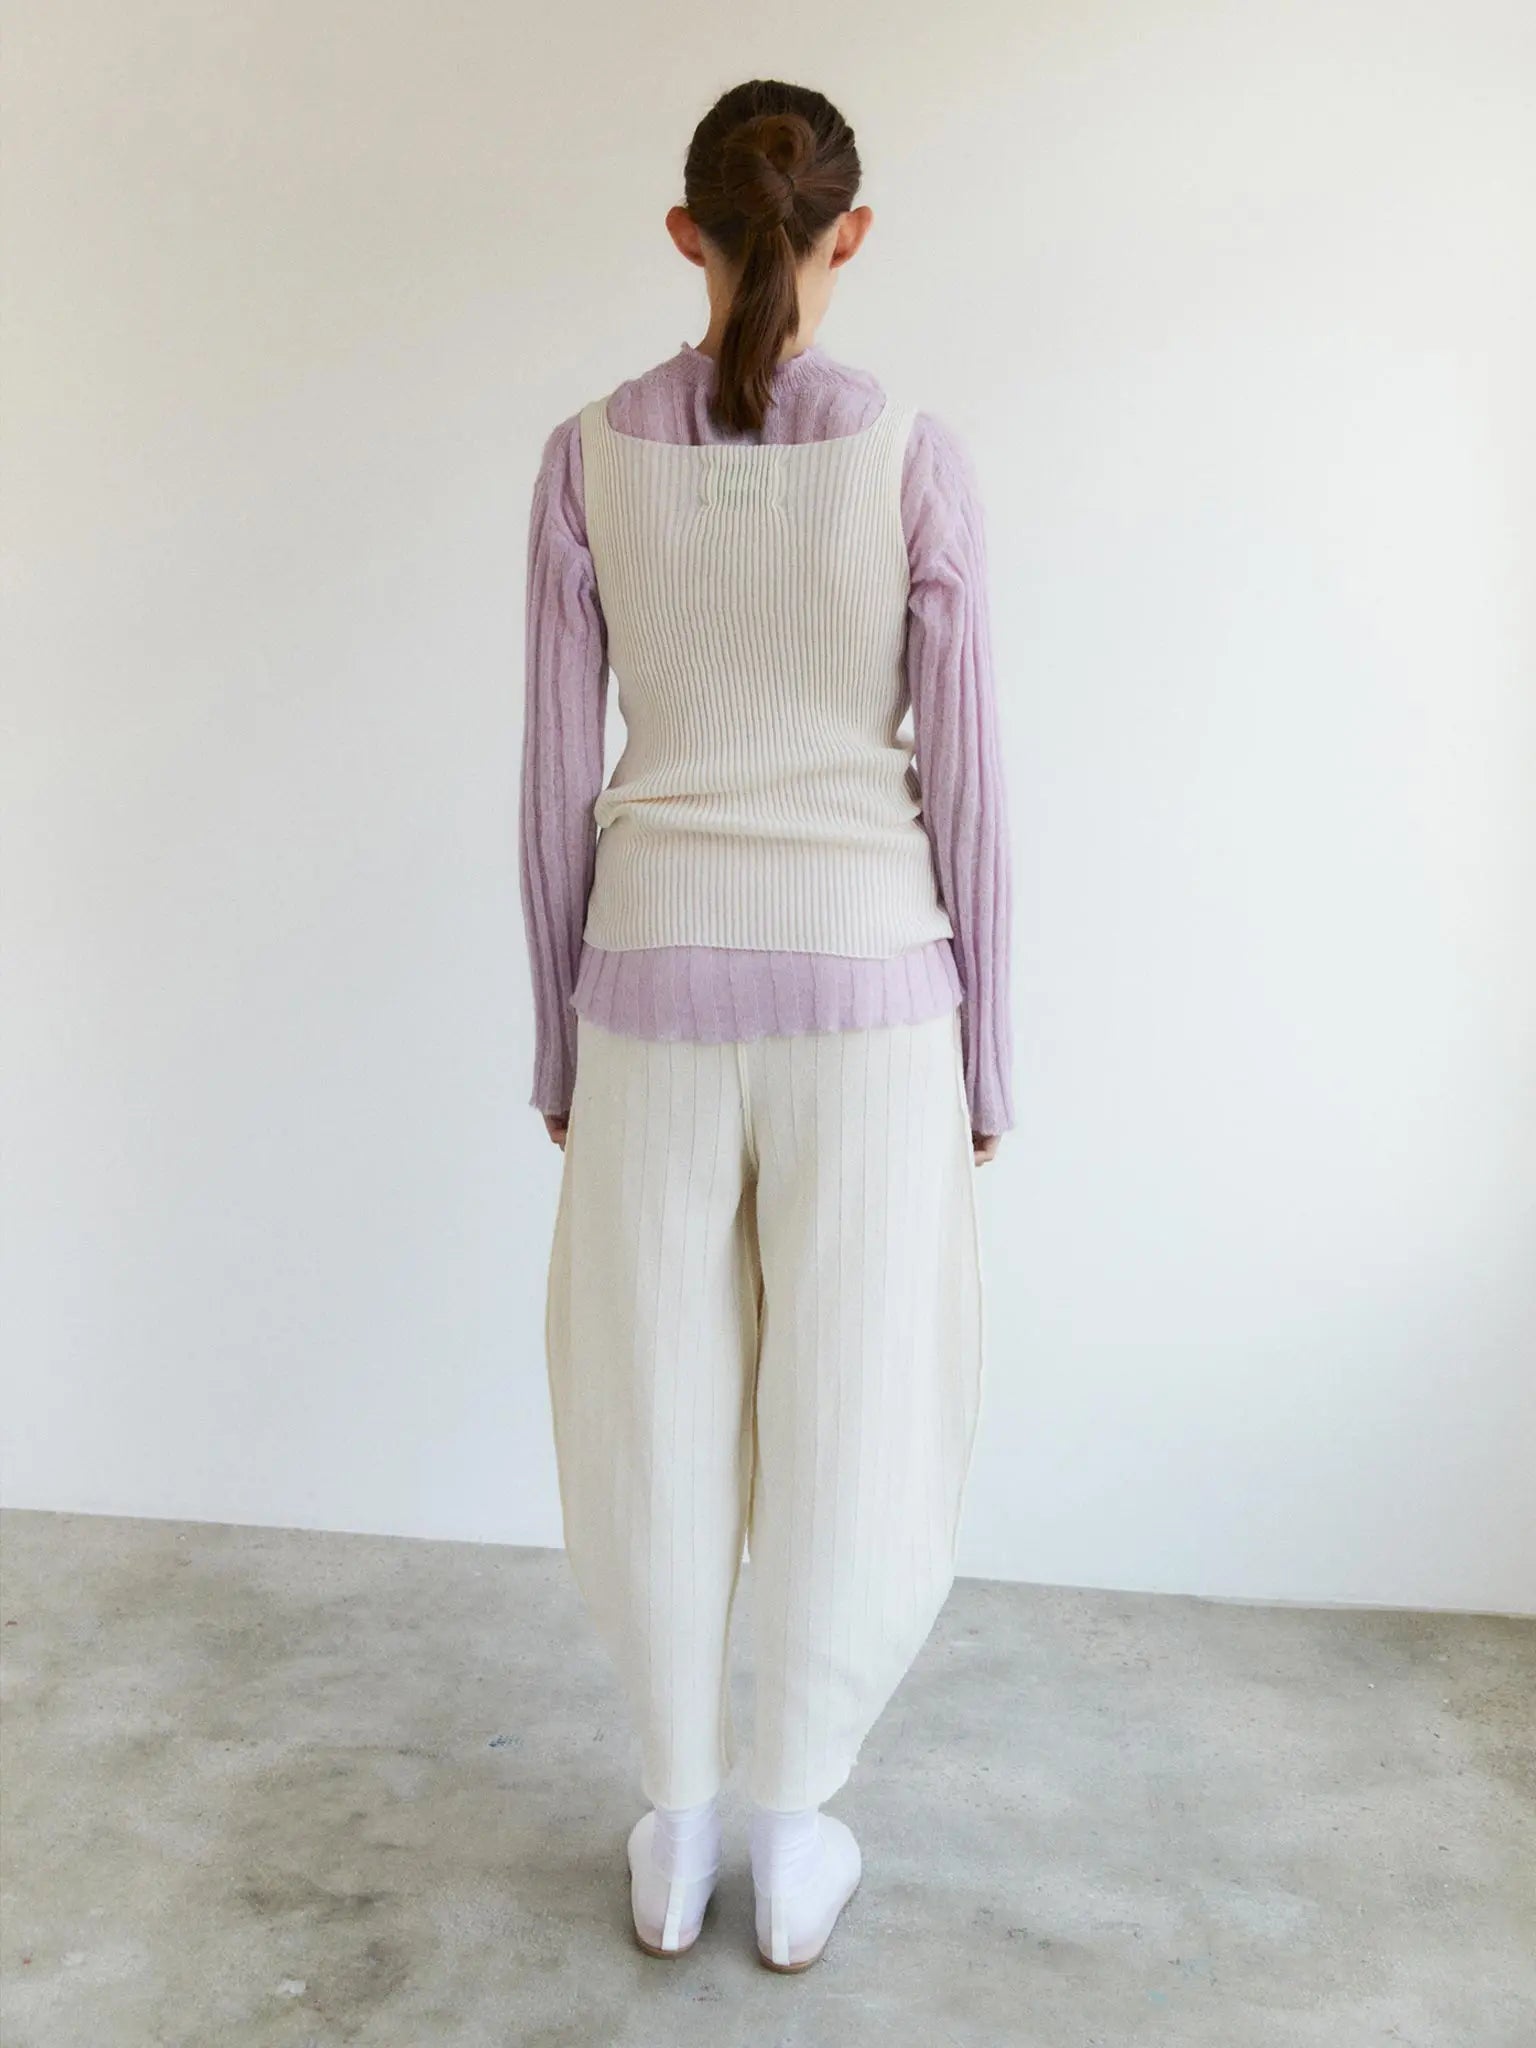 An image of a pair of Ohirune Pants Chalk from Rus. The pants feature an elastic waistband and a relaxed fit, lying flat on a plain white background.